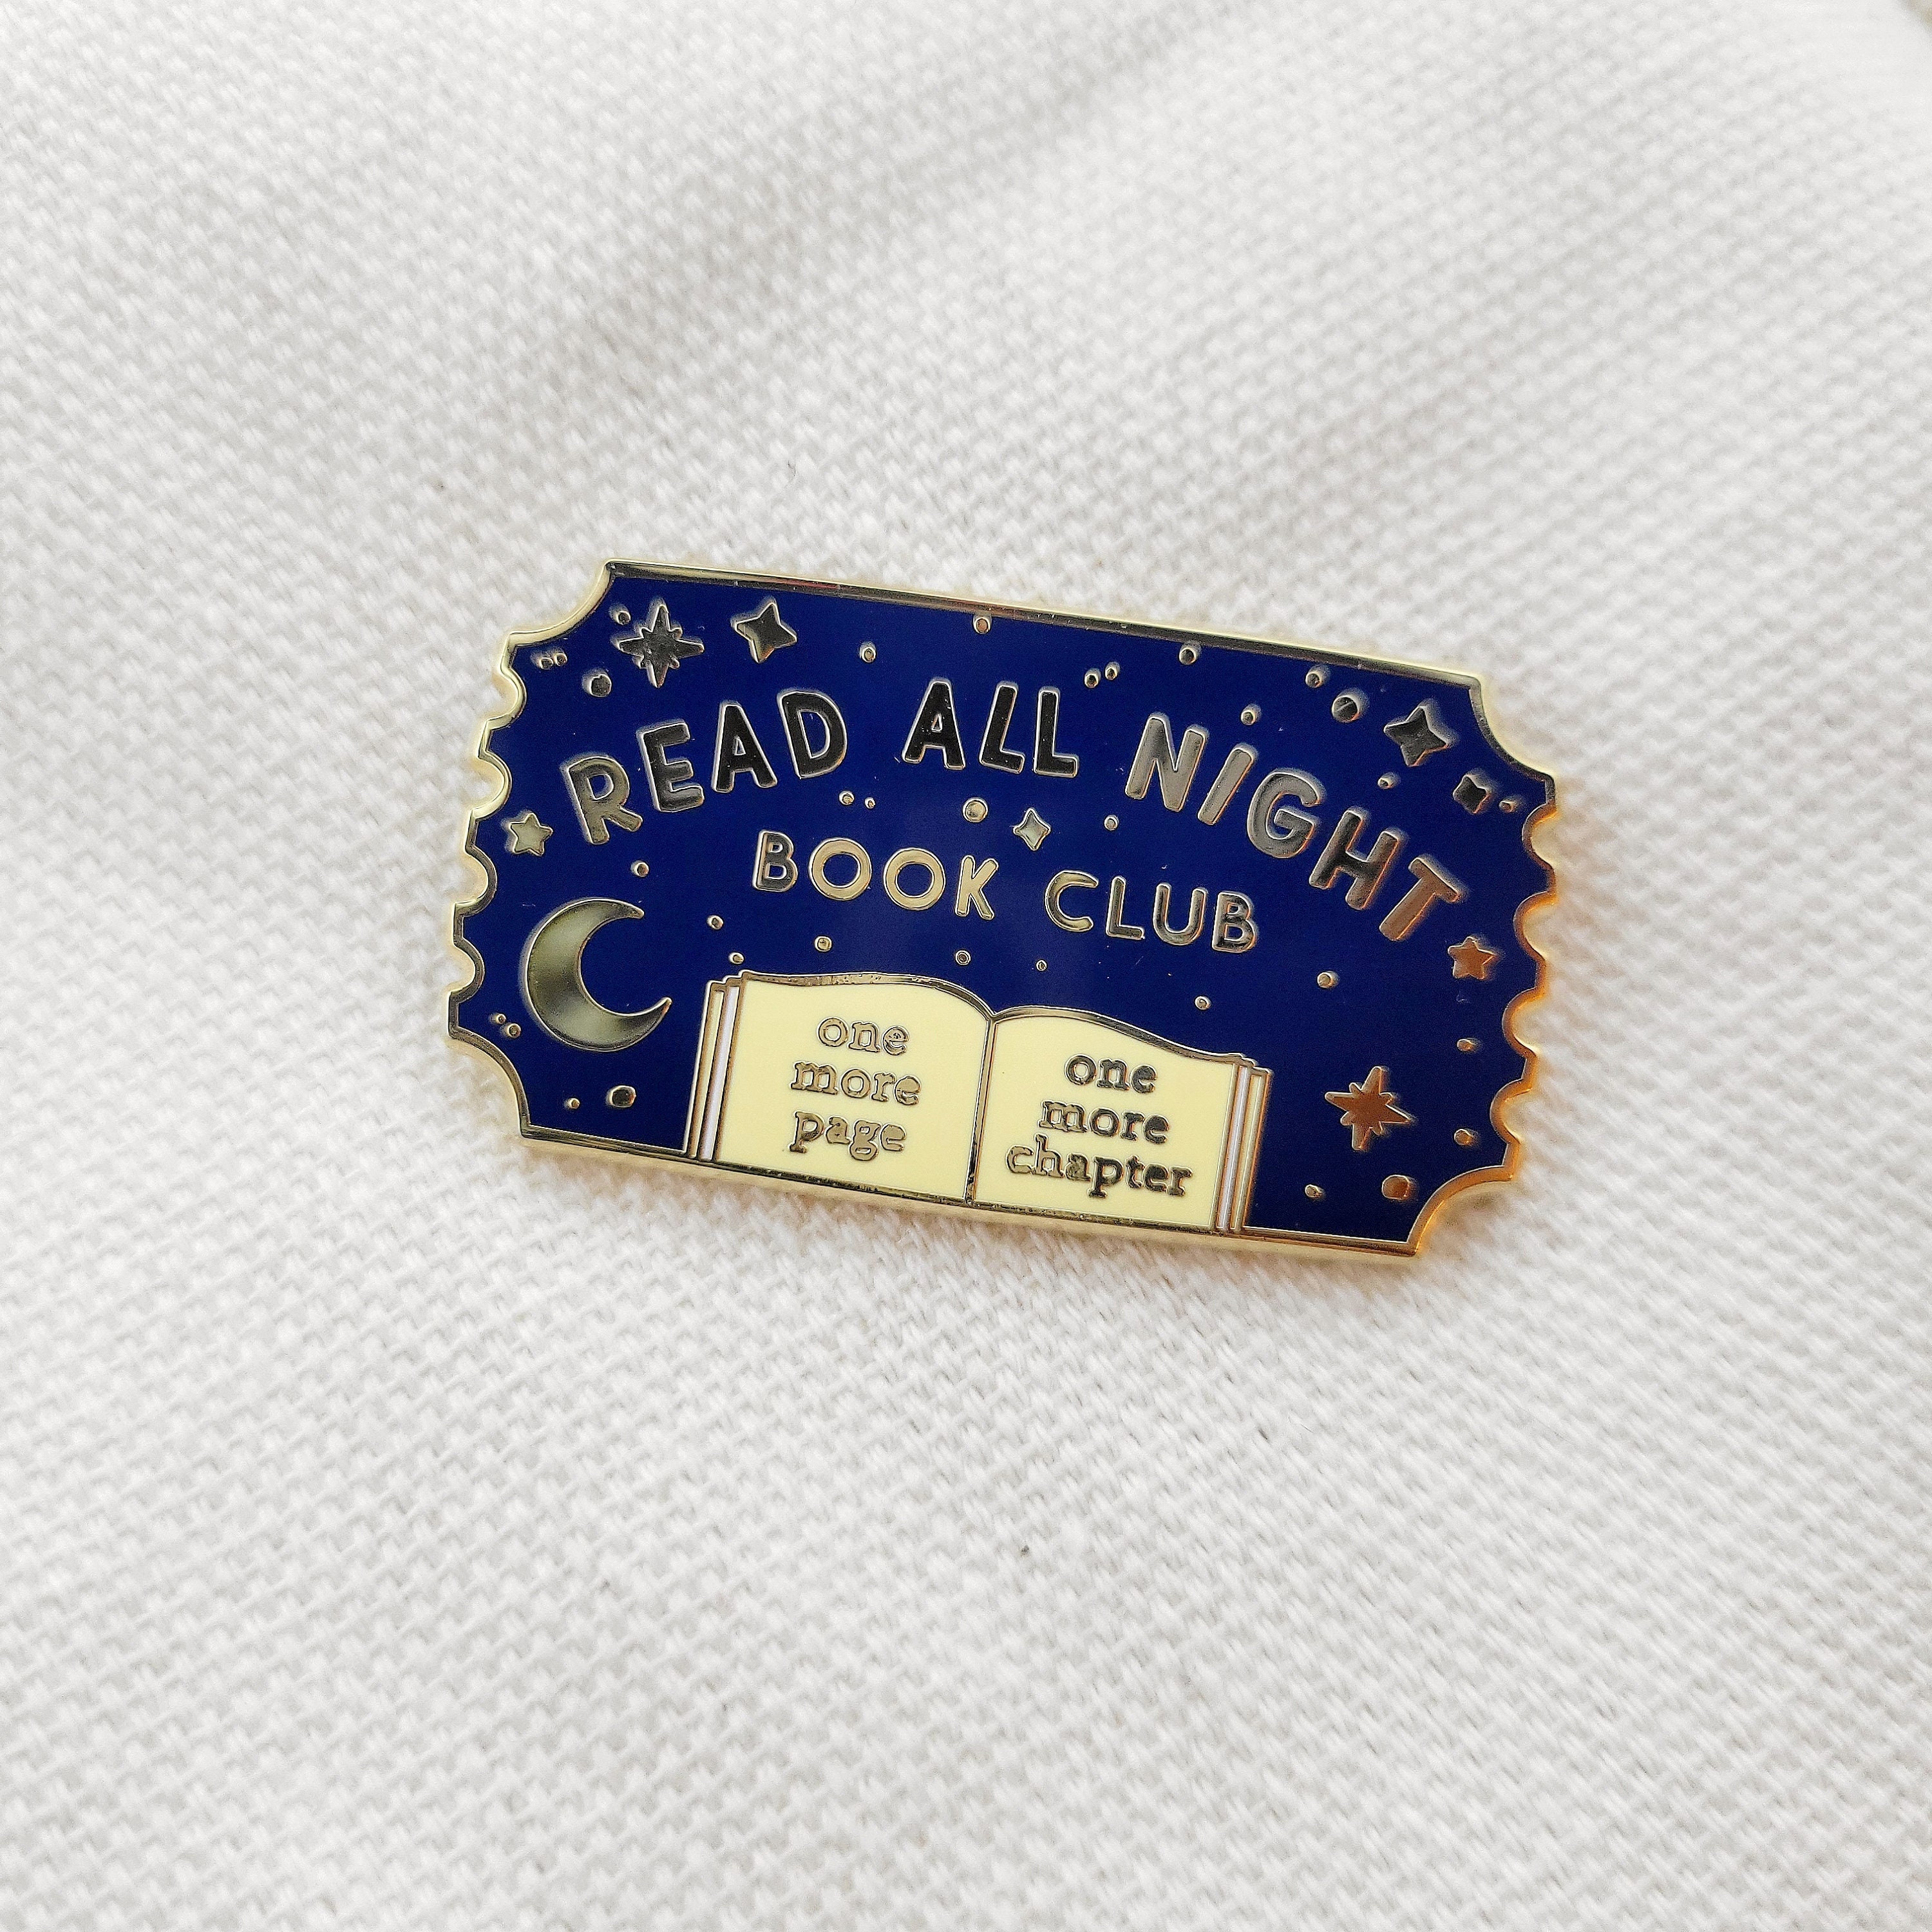 Book Badges, Button Badges, Book Club Gifts, Book Club, Gifts for Book lovers, Gifts for Bookworms, Gifts for Librarians